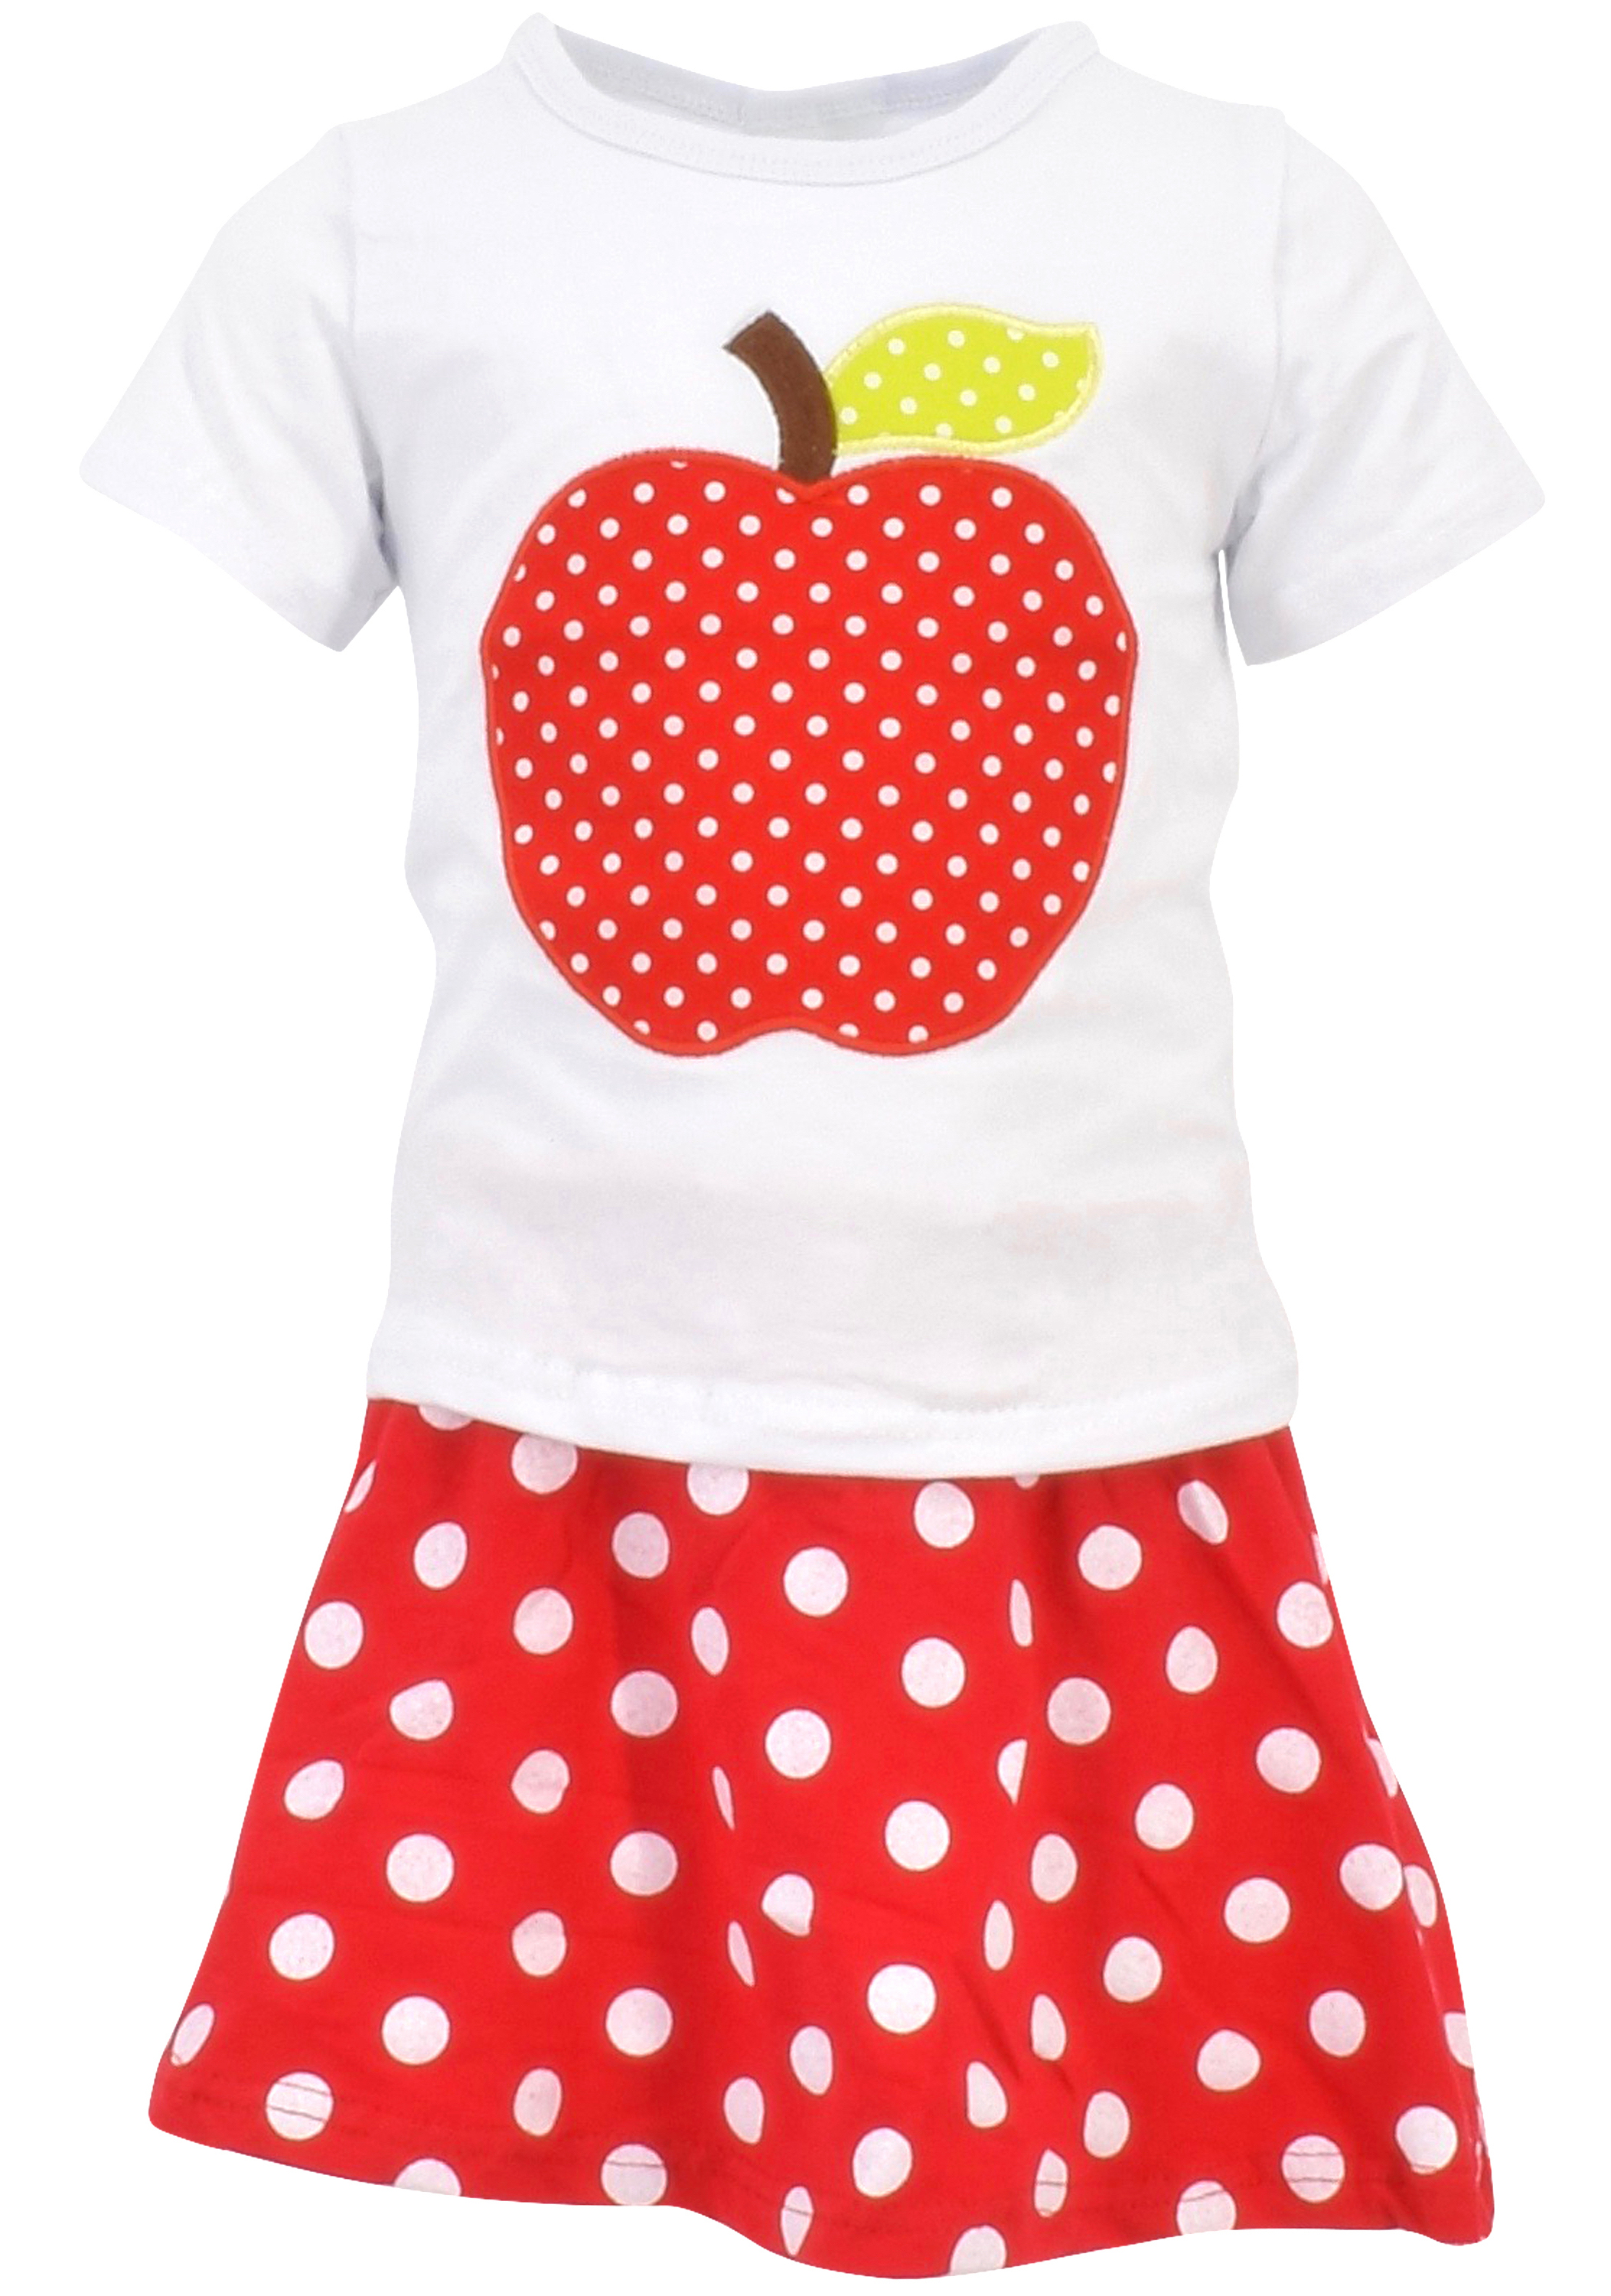 Unique Baby Girls Back to School Apple Skirt Boutique Outfit (5T/L, Red) - image 1 of 4